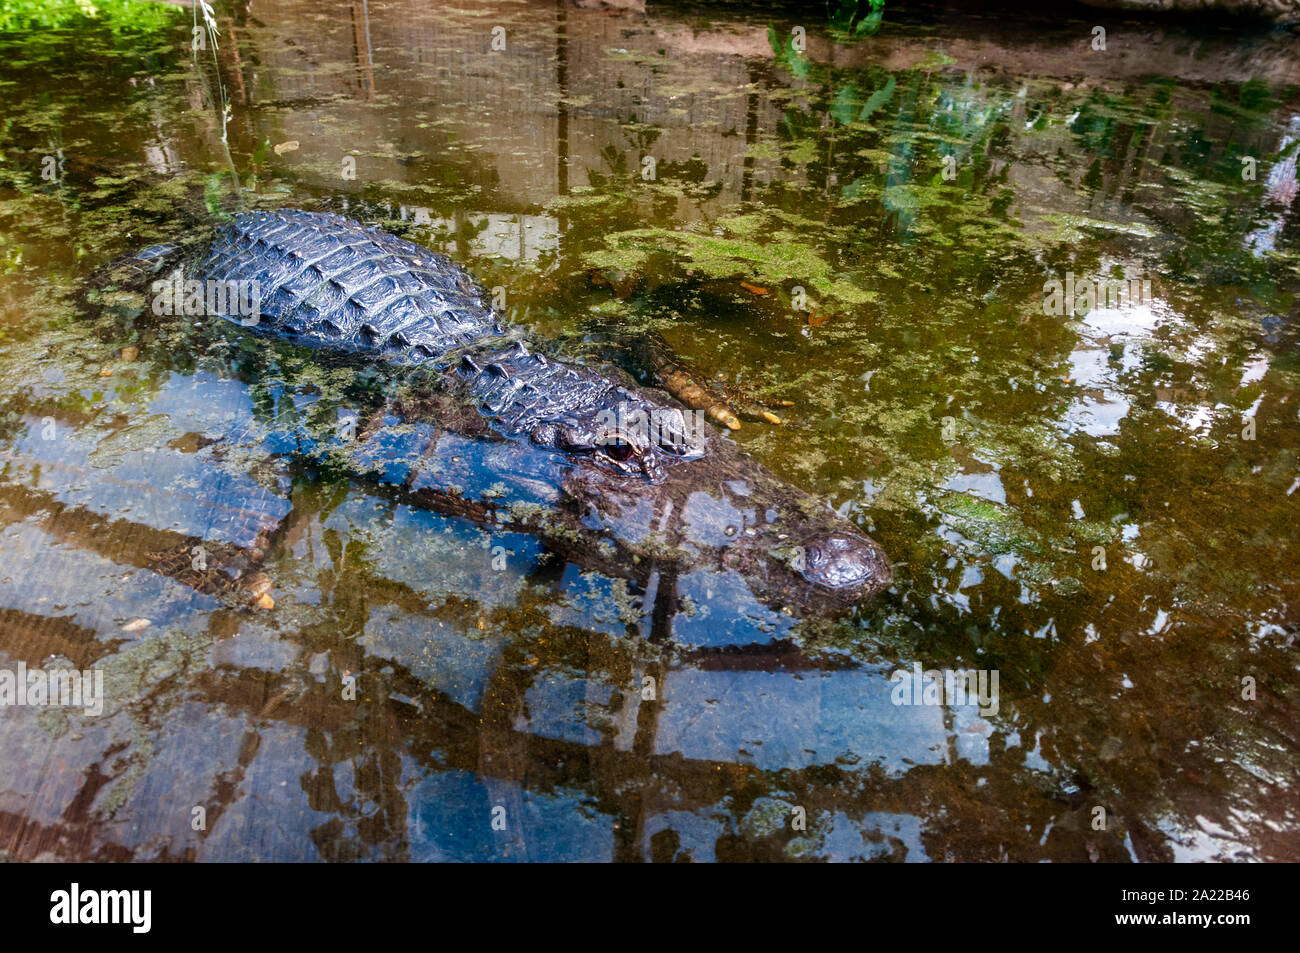 A large dark greyish alligator rests with outstretched limbs on the bottom of a shallow pool showing the top of its back, head, tip of snout and eye Stock Photo